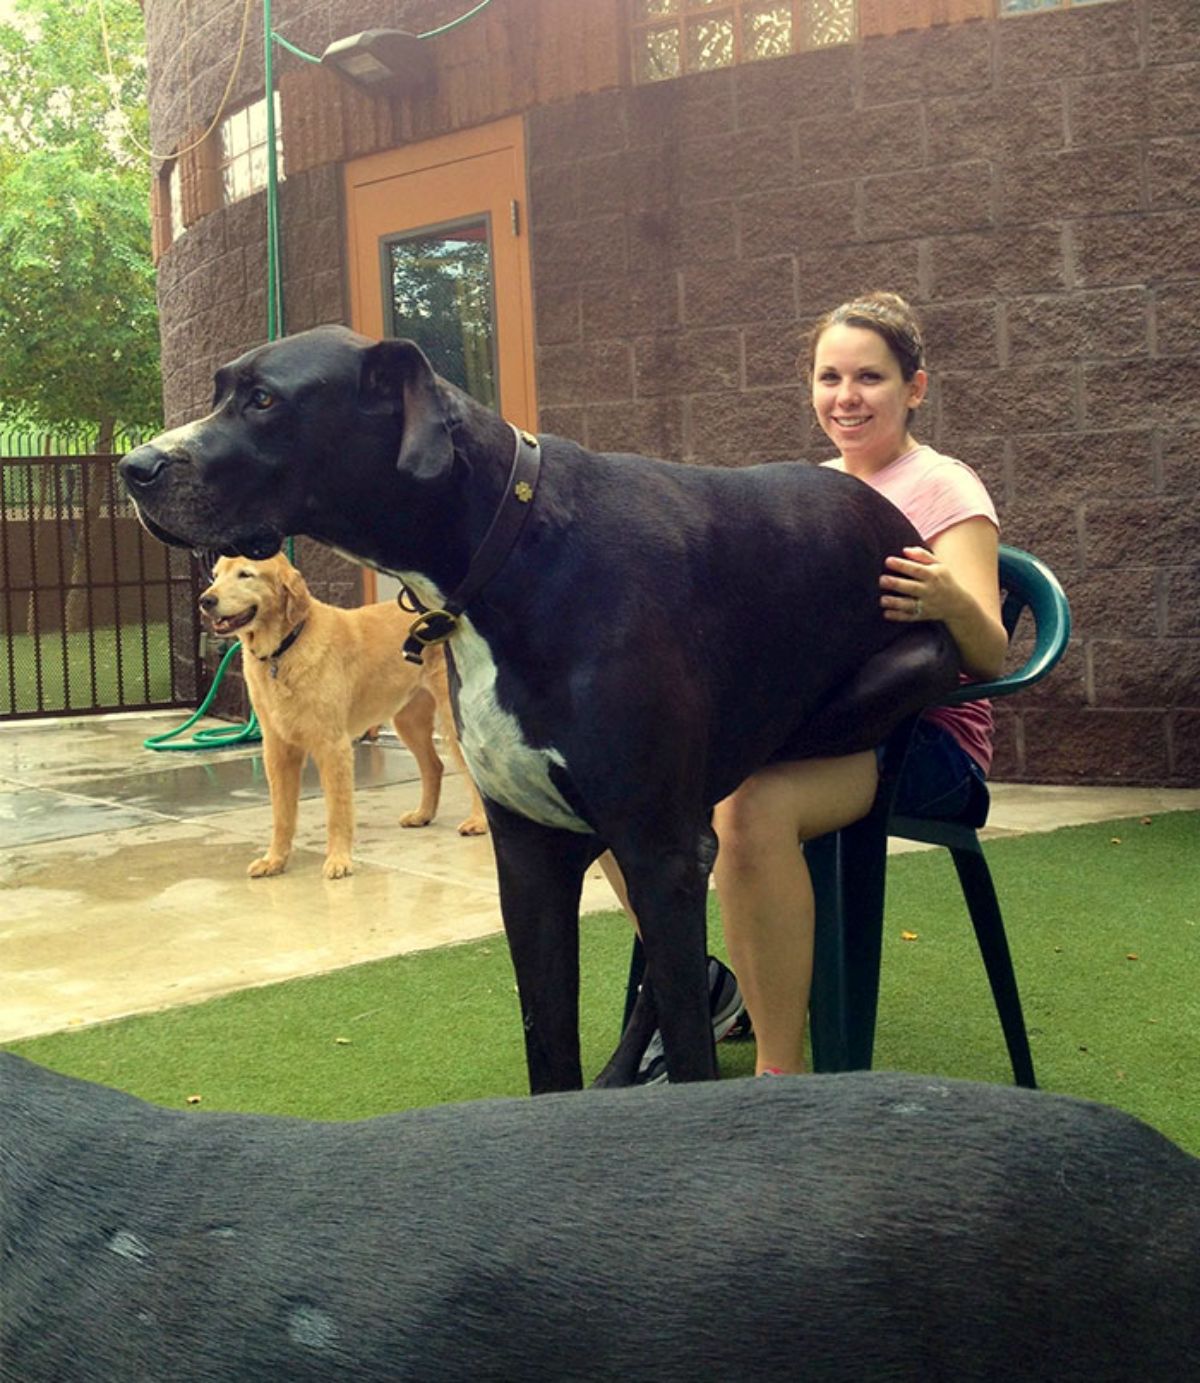 black great dane sitting on a woman's lap and the woman is sitting in a chair and a brown dog is behind them